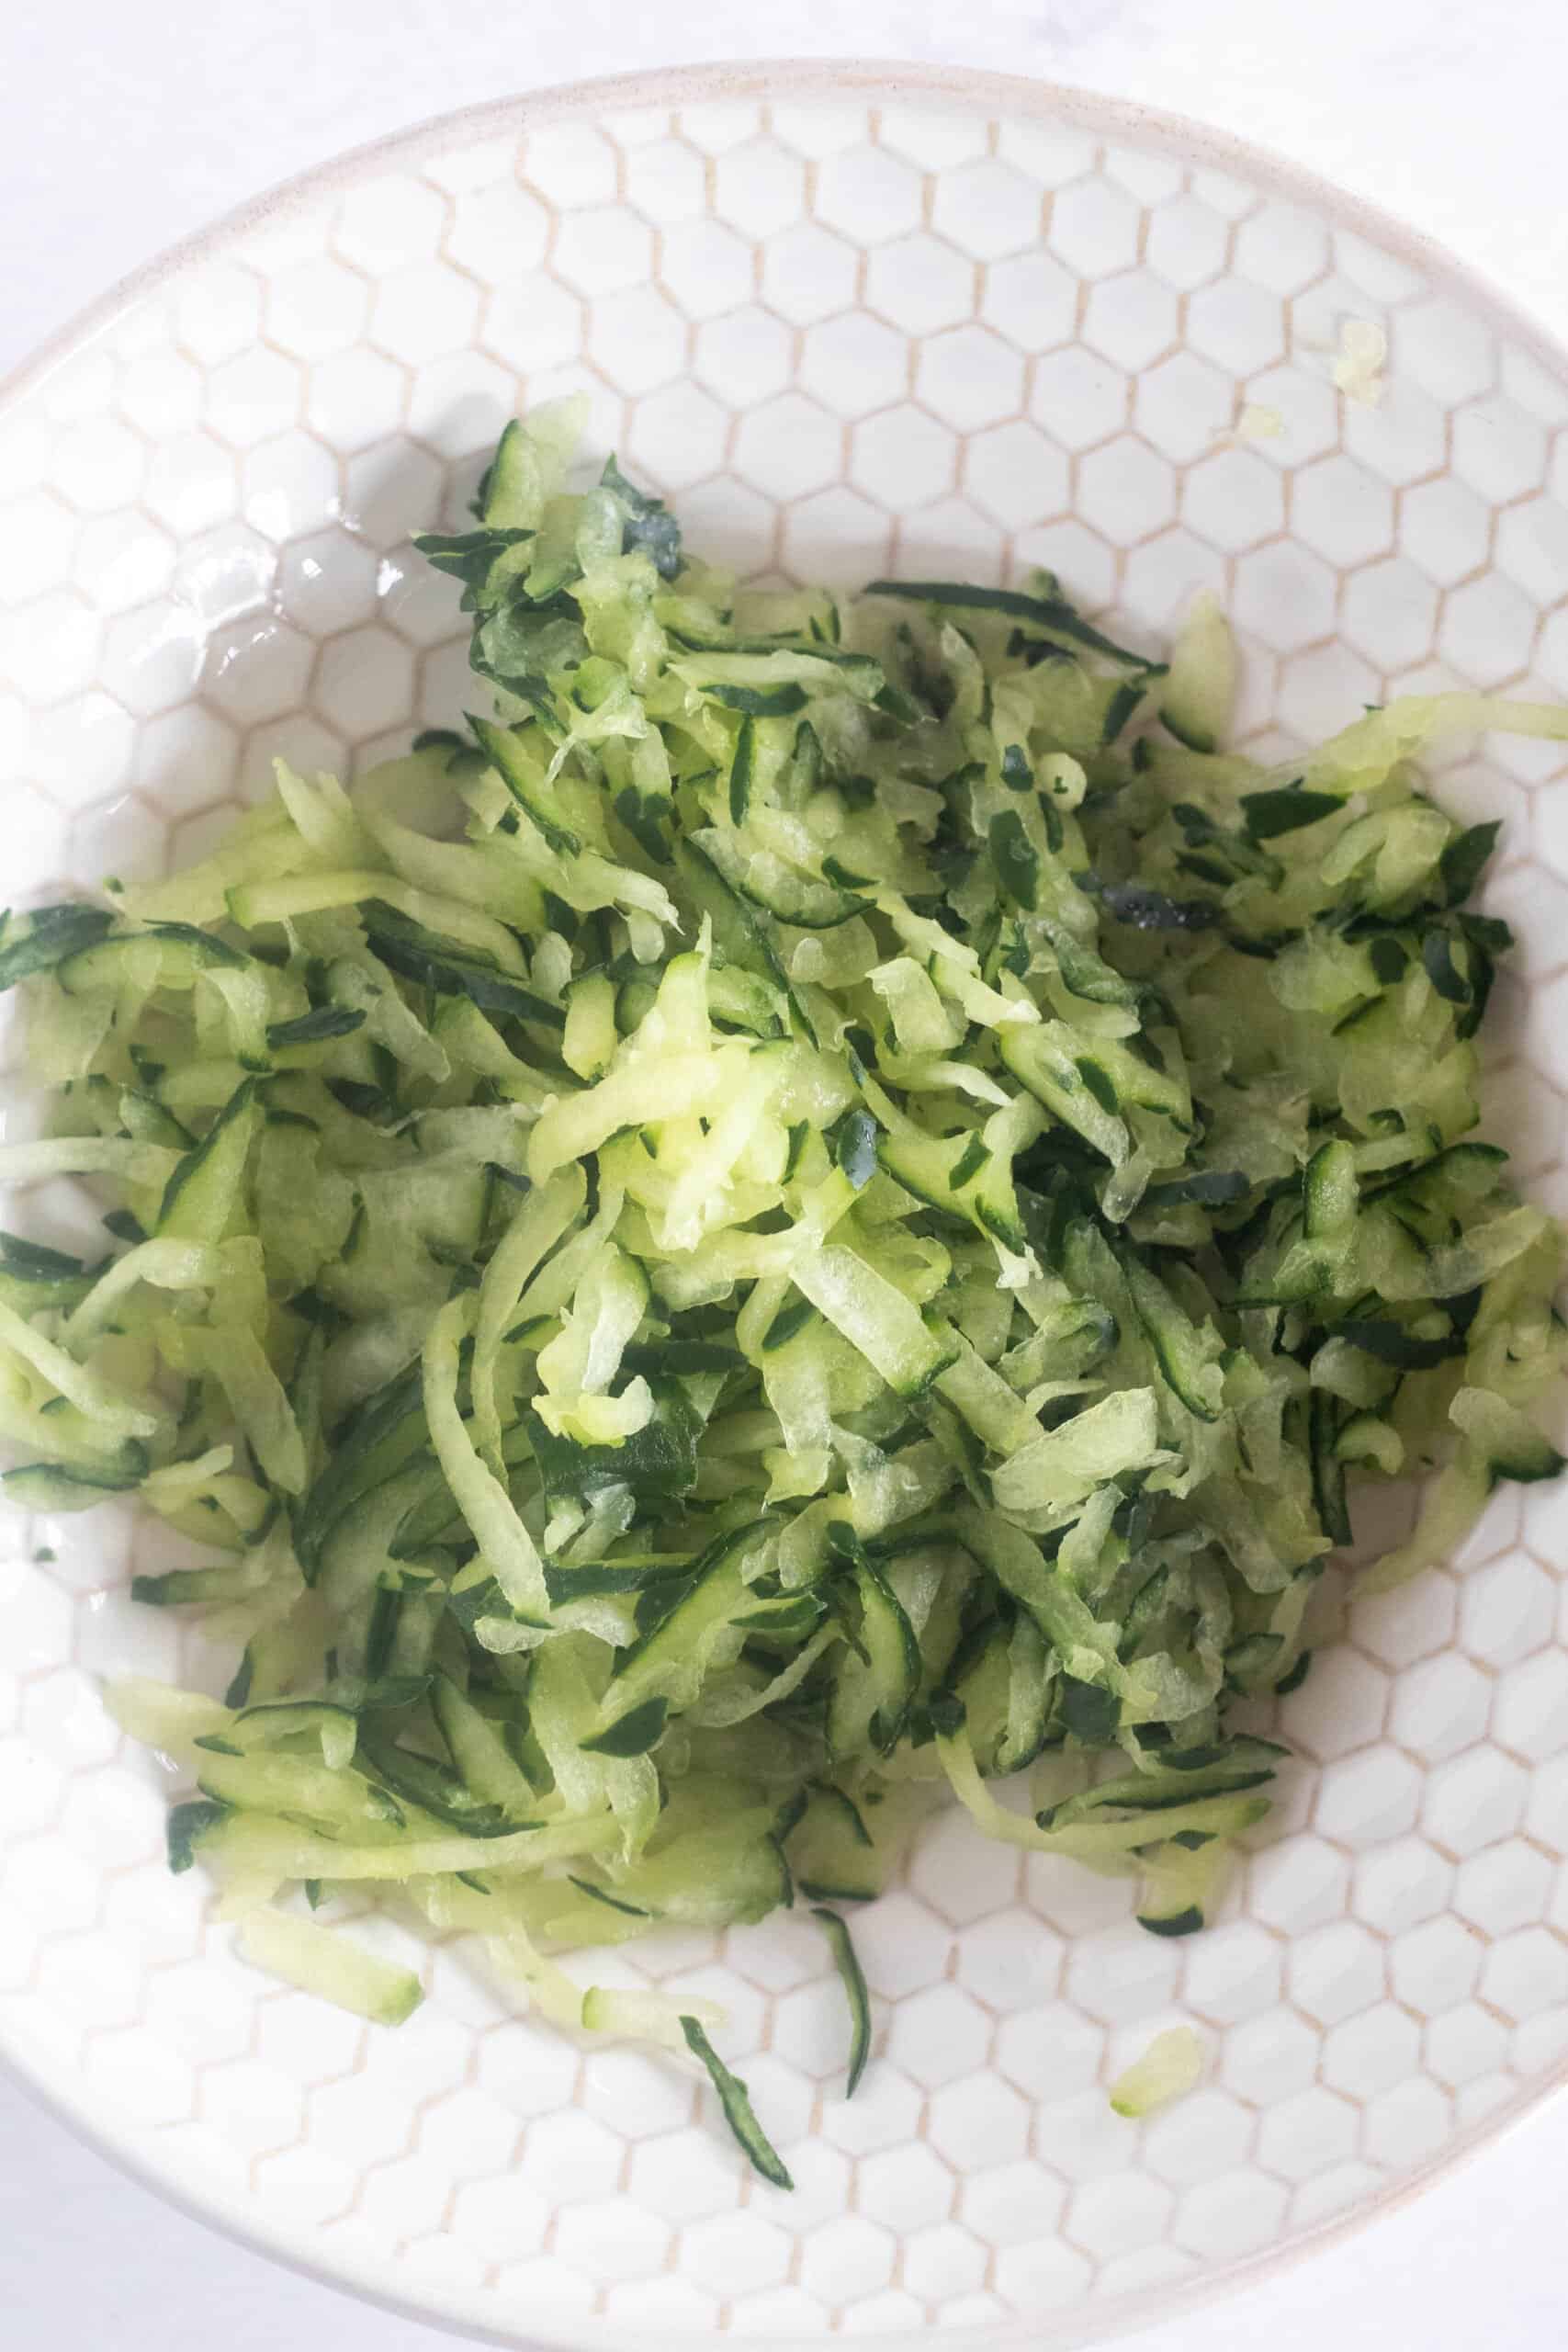 shredded cucumber after squeezing out juice